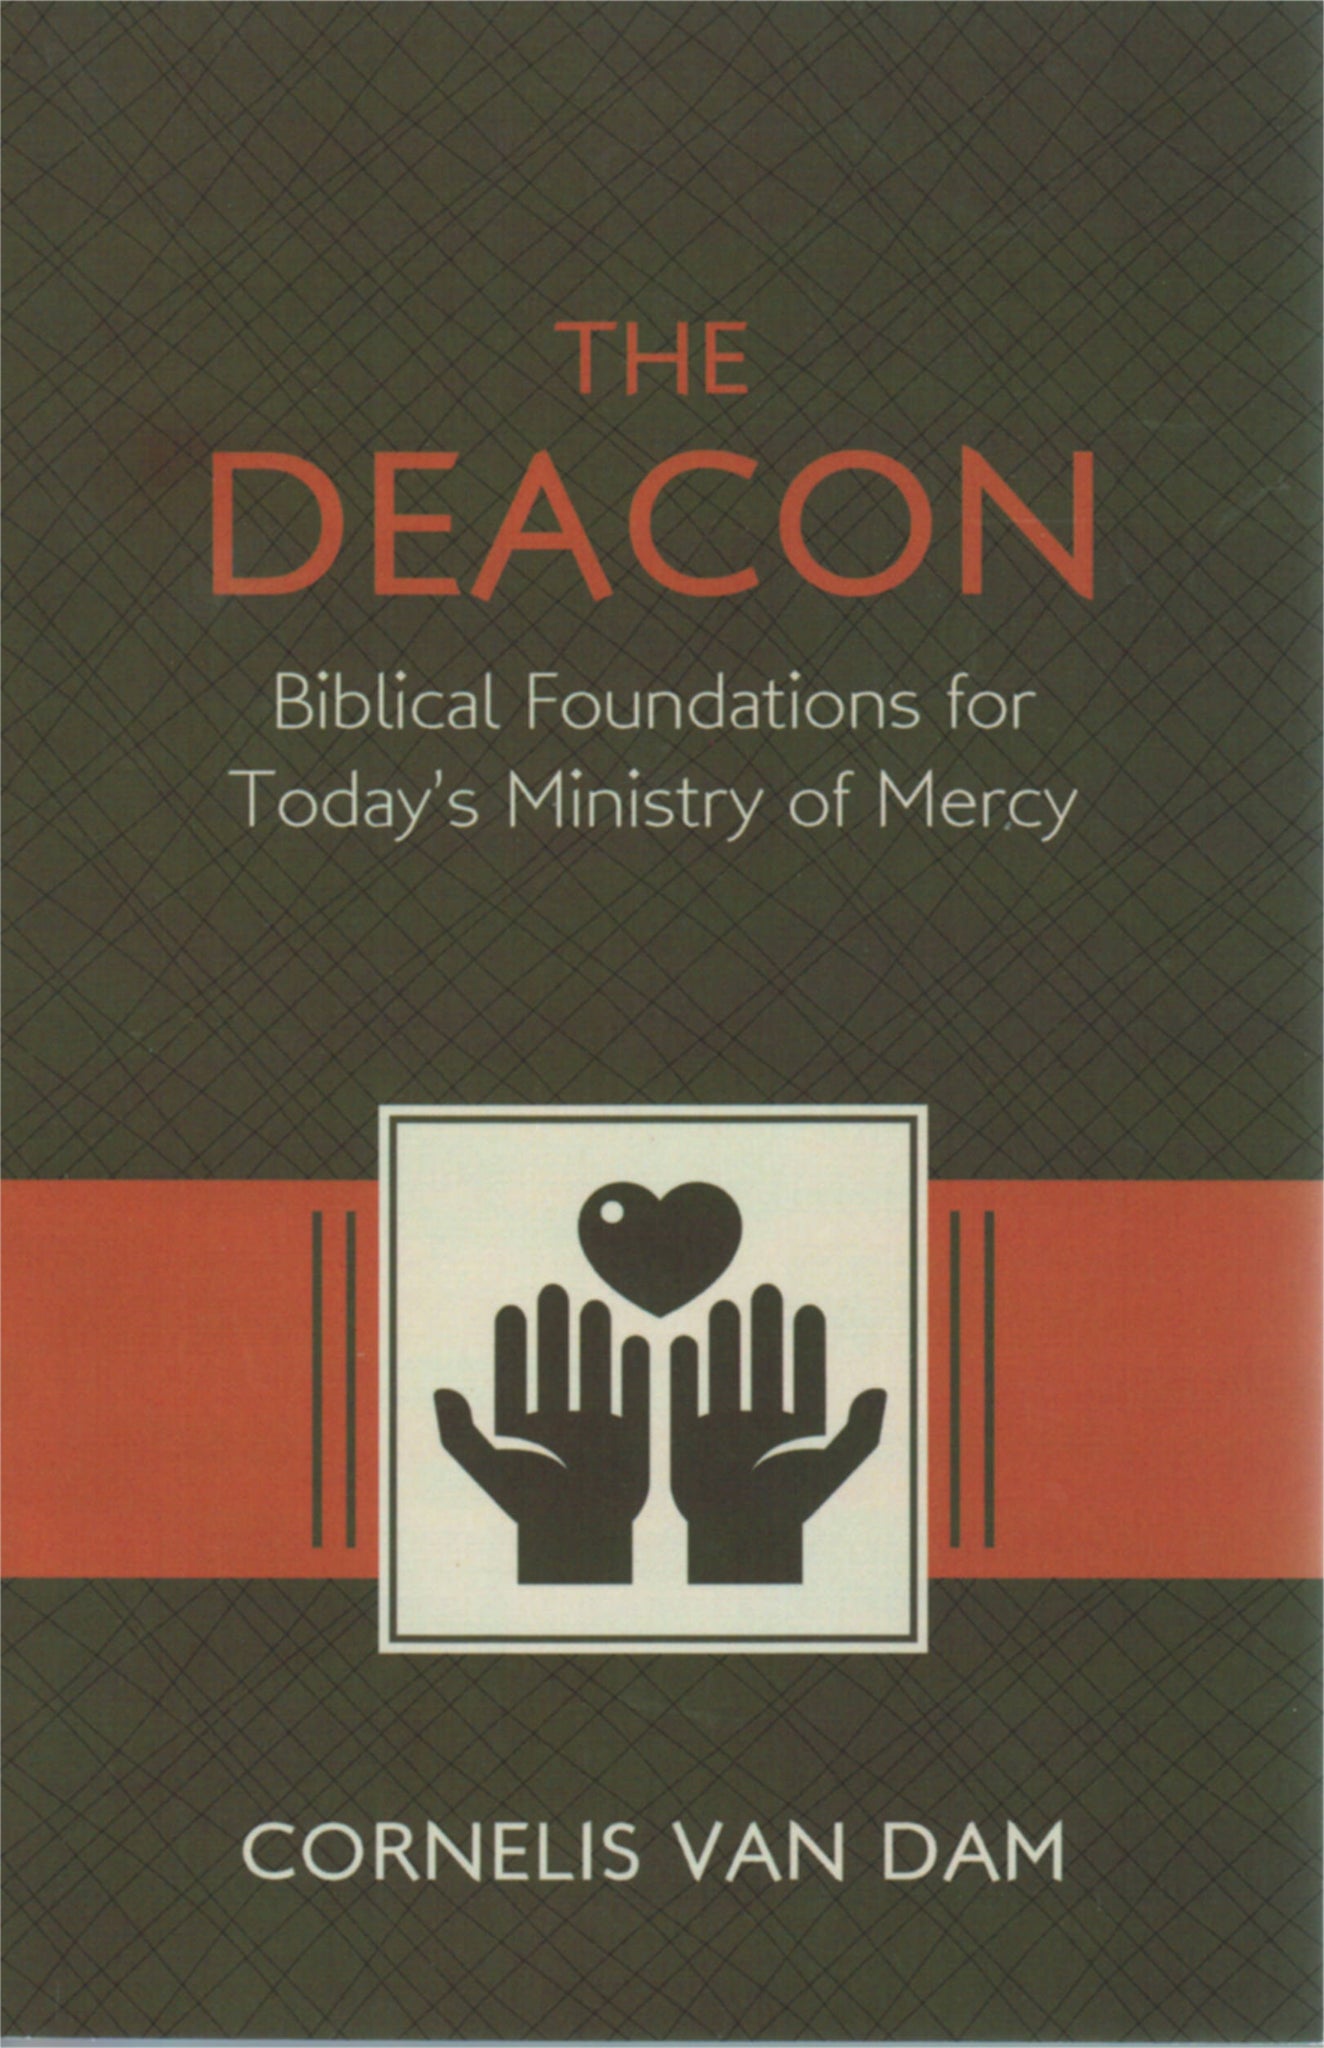 The Deacon: Biblical Foundations for Todays Ministry of Mercy